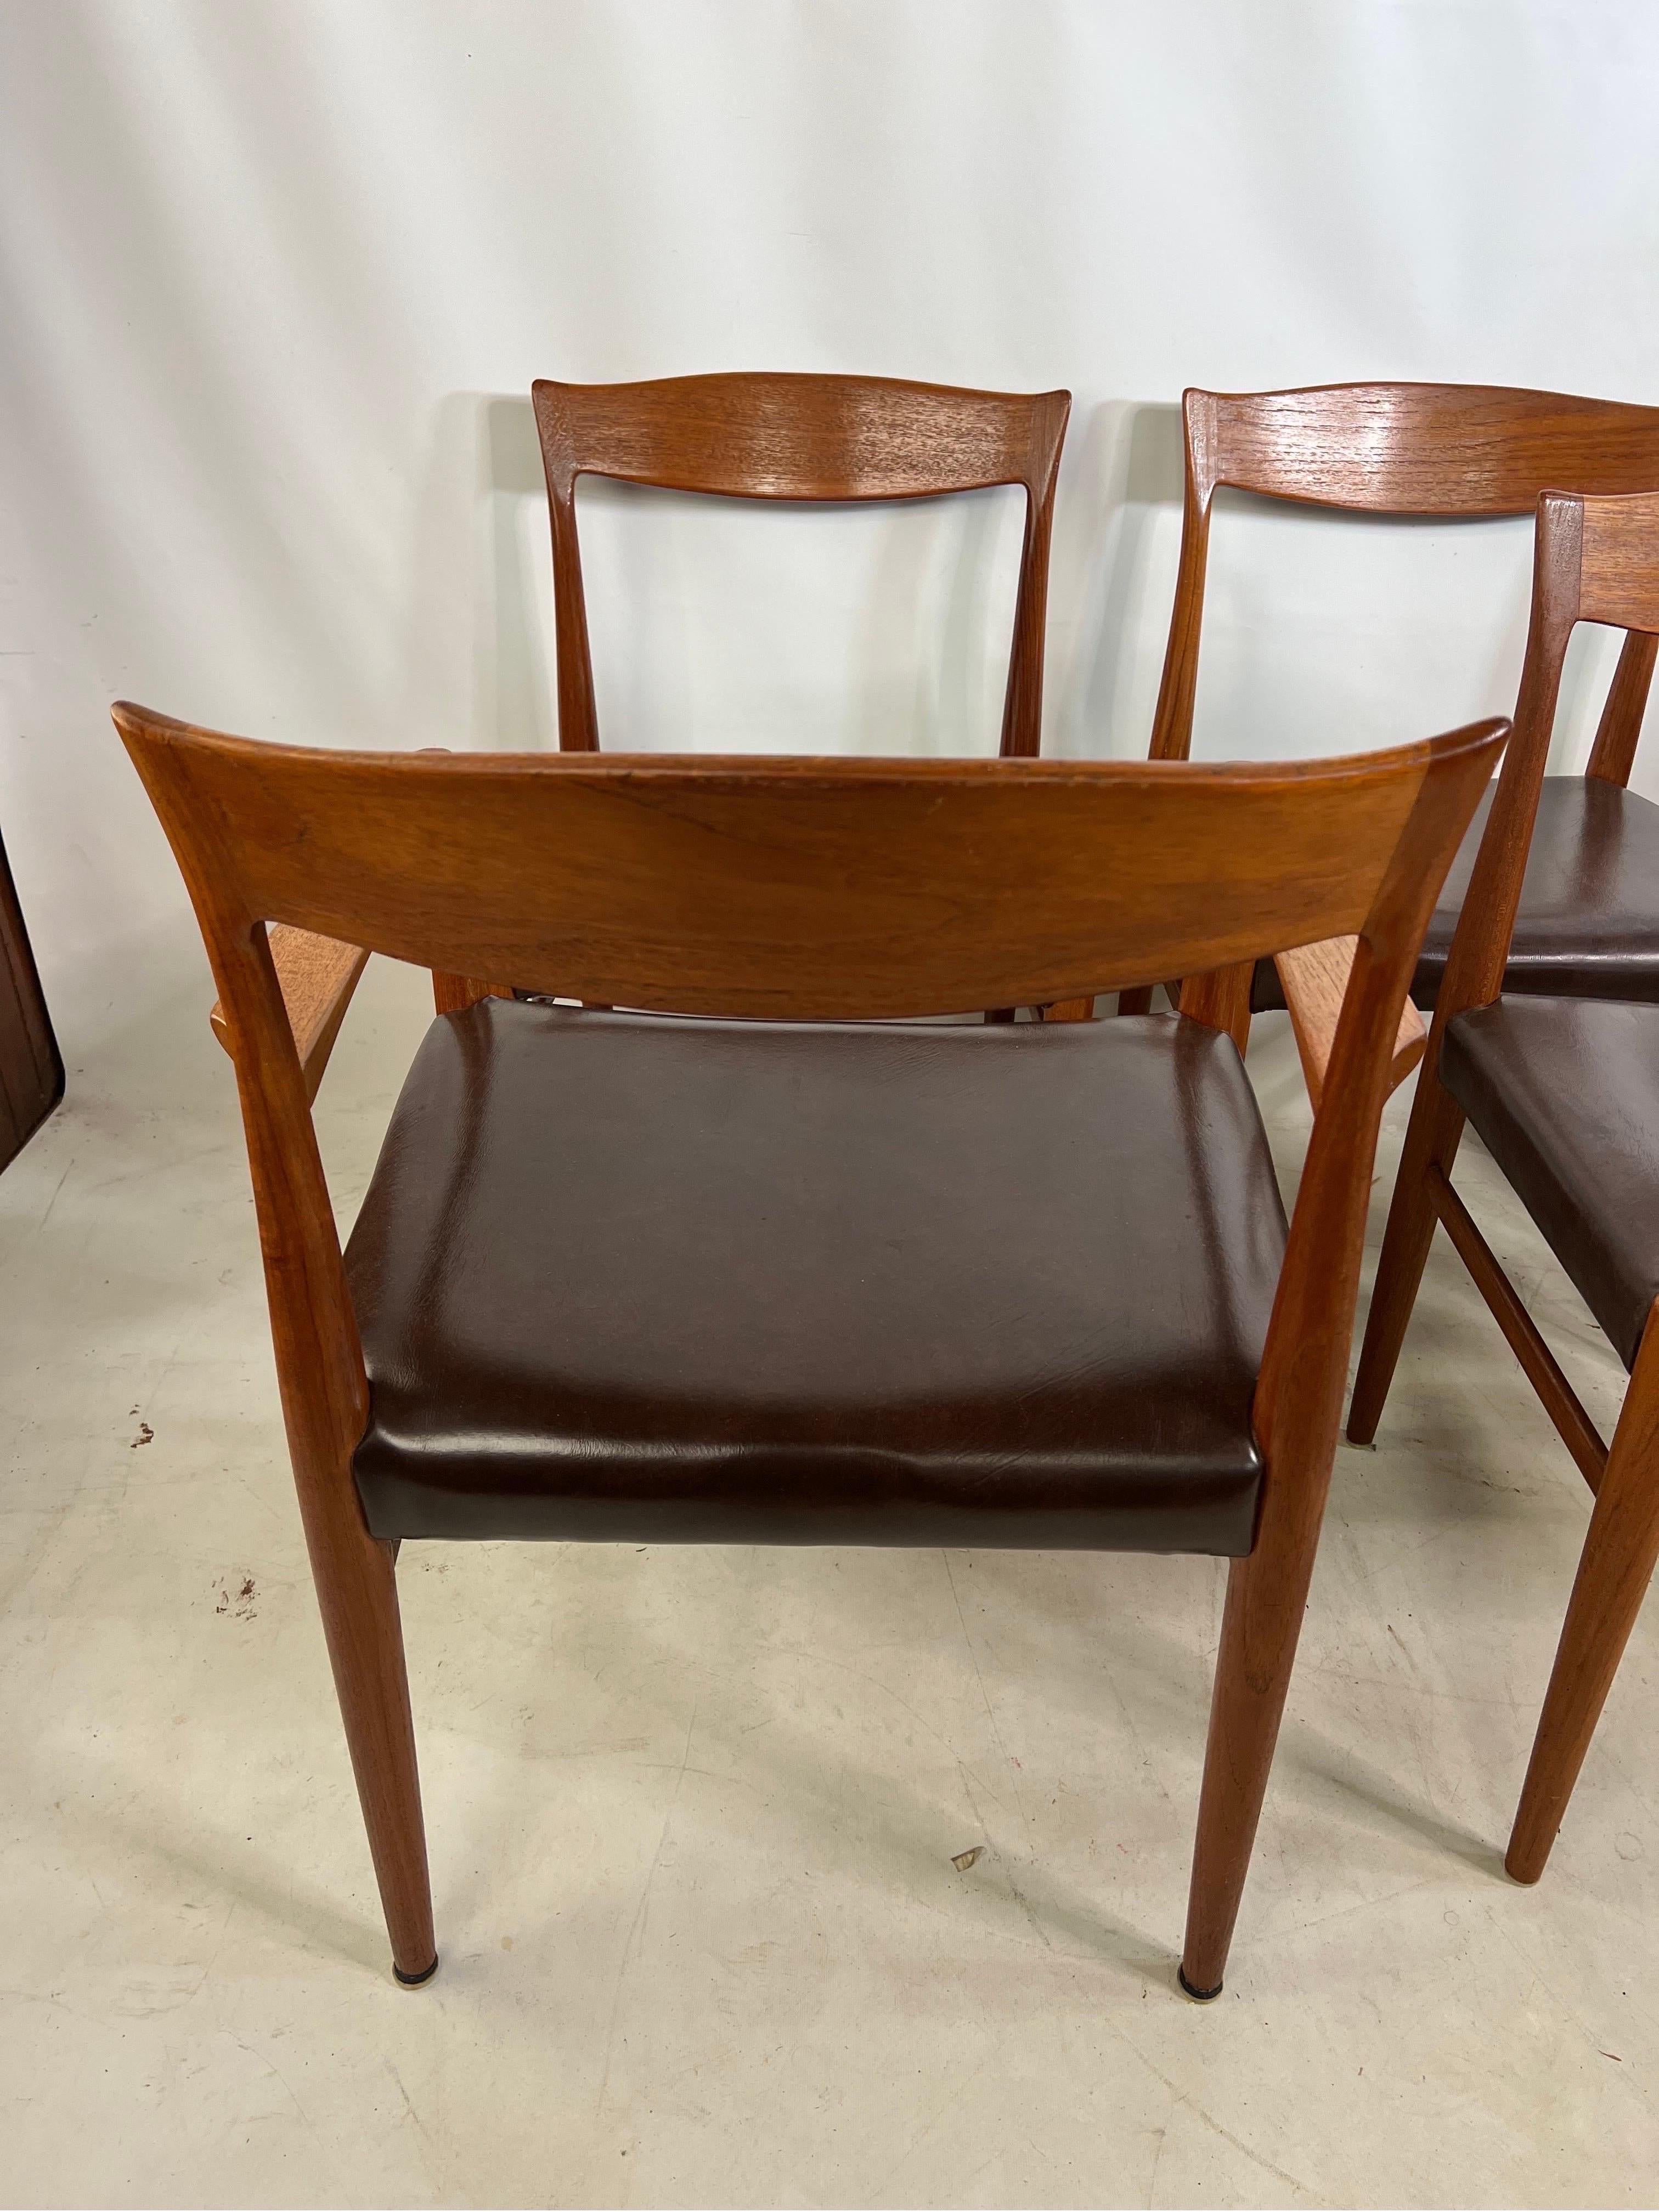 Mid-20th Century Vintage Danish Teak Sculptural Dining Chairs - a Set of 6 For Sale